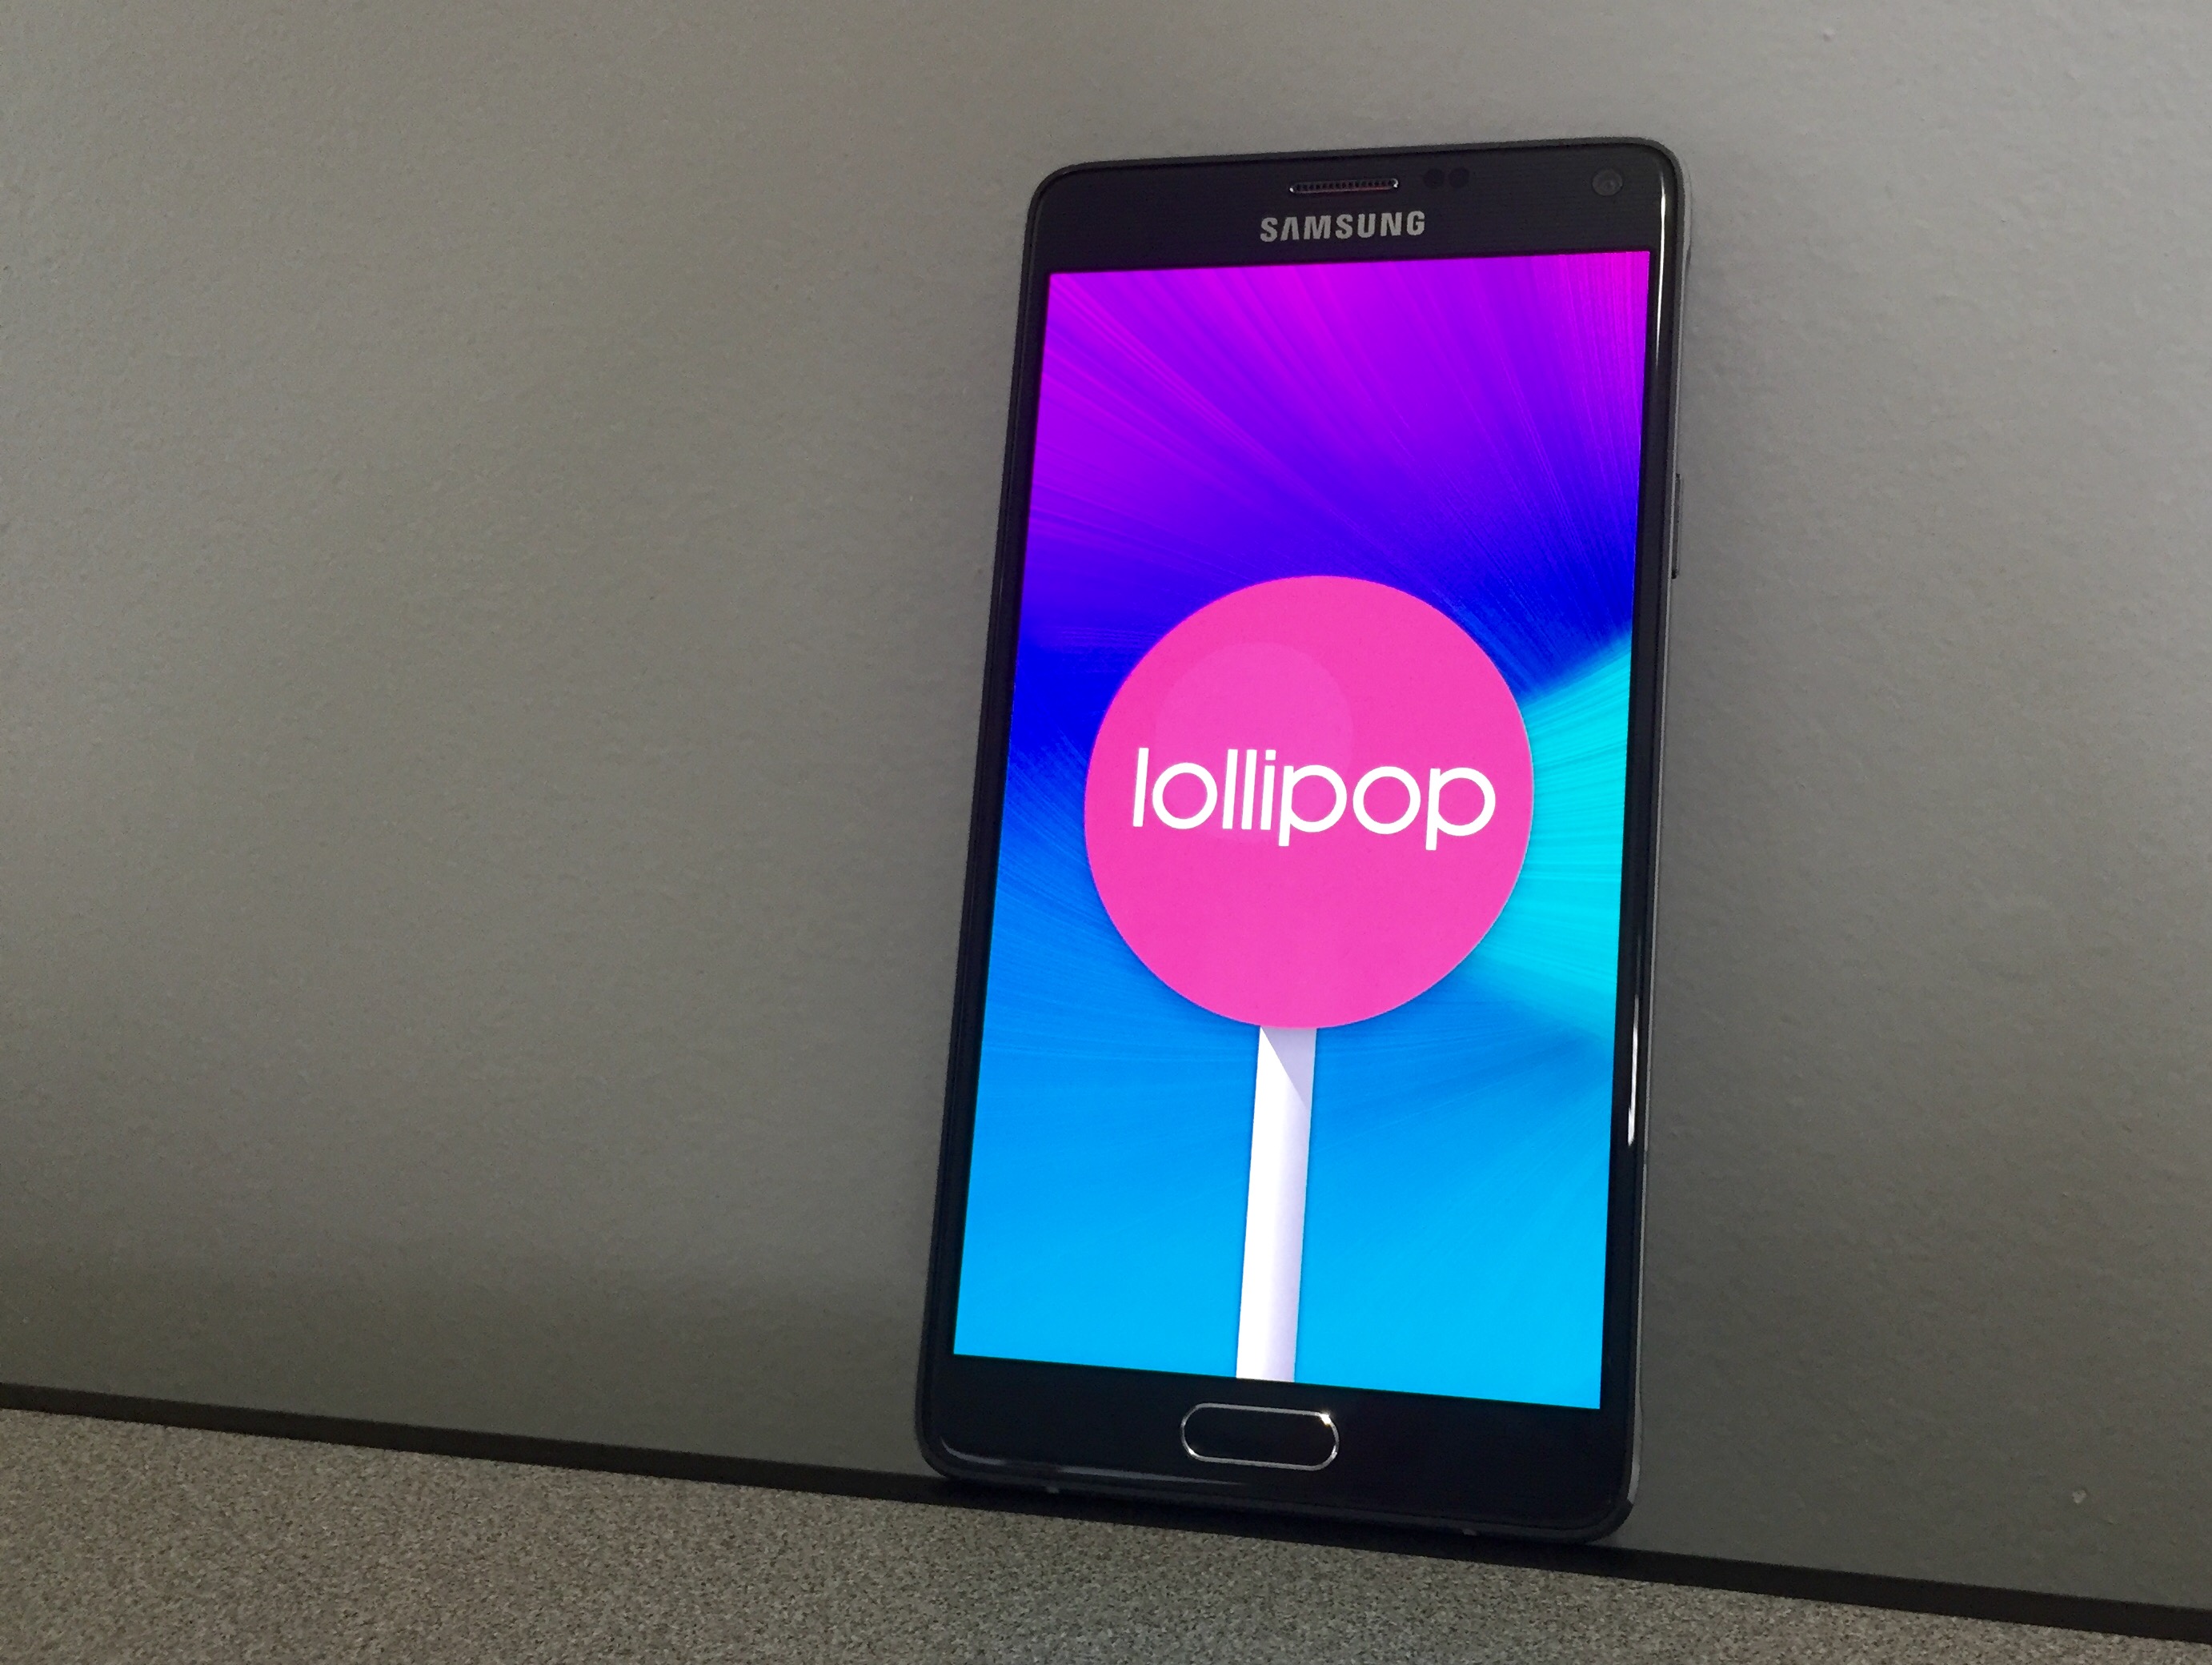 What you need to know about the Verizon Galaxy Note 4 Lollipop update.